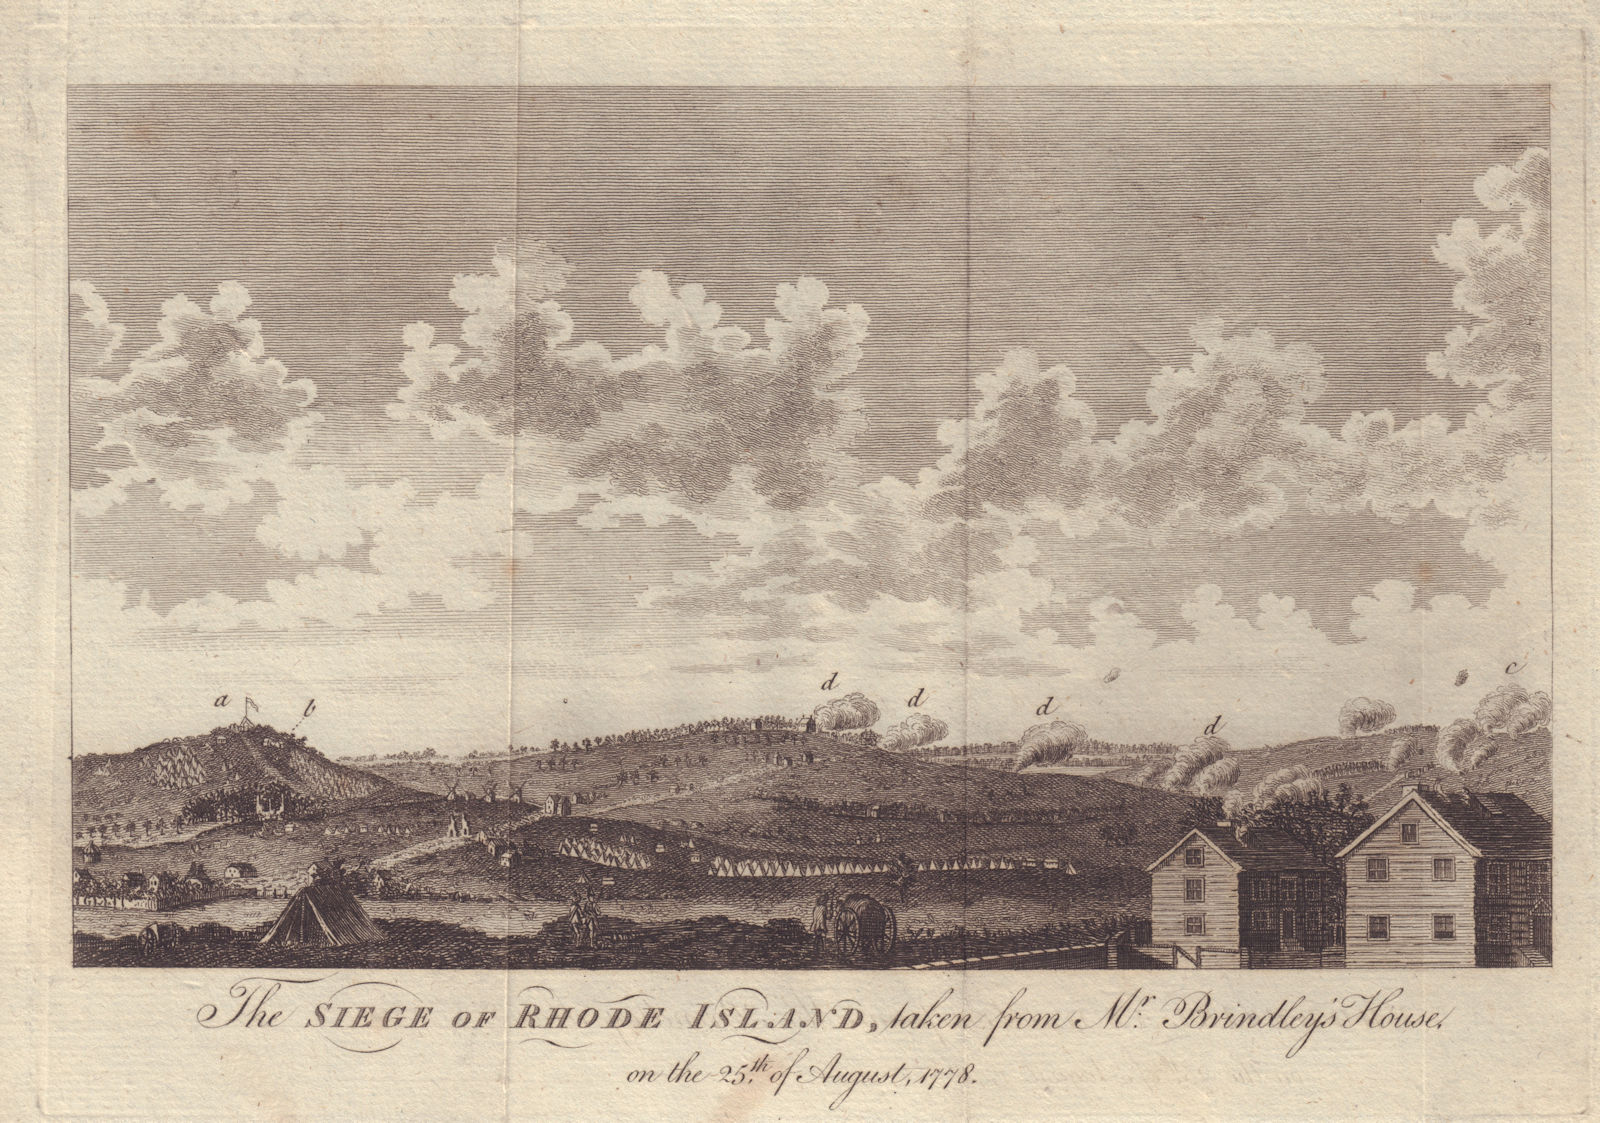 The Siege of Rhode Island… from Mr Brindley's House on 25th of August 1778. 1779